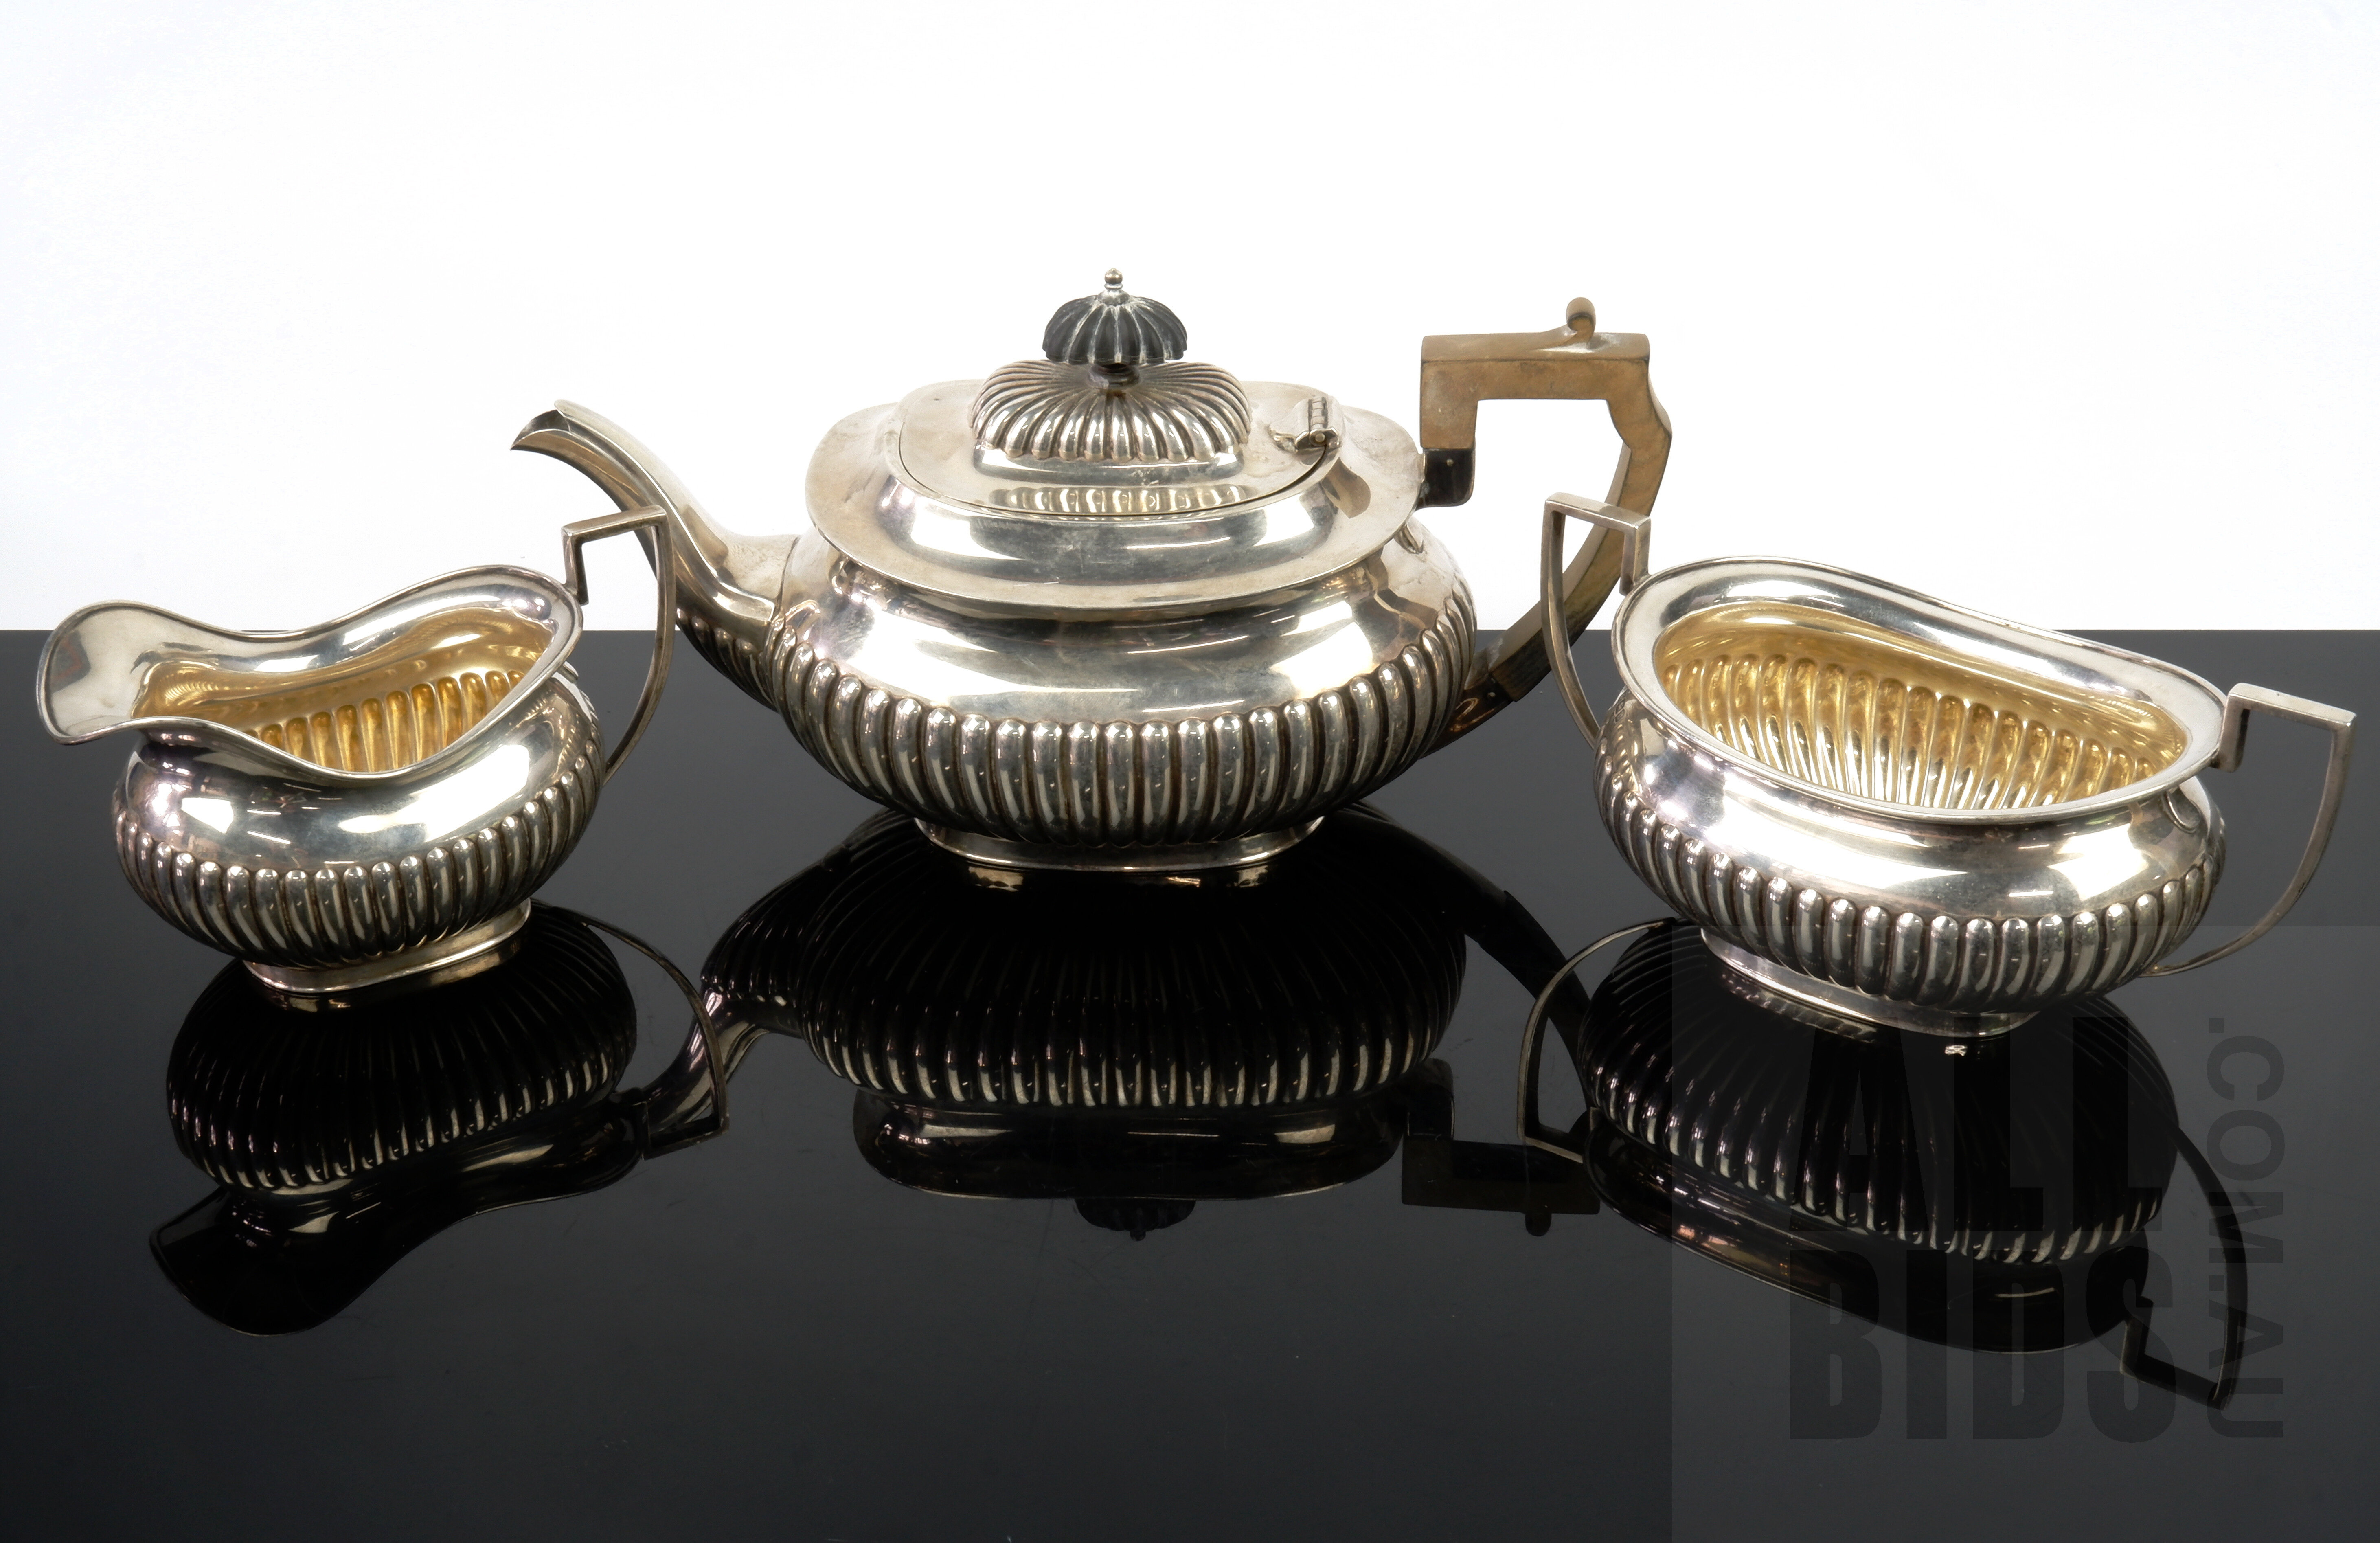 'Antique Sterling Silver Teapot with Matching Creamer Jug and Sugar Bowl, Sheffield, Joseph Rodgers & Sons, 1913, 1124g'